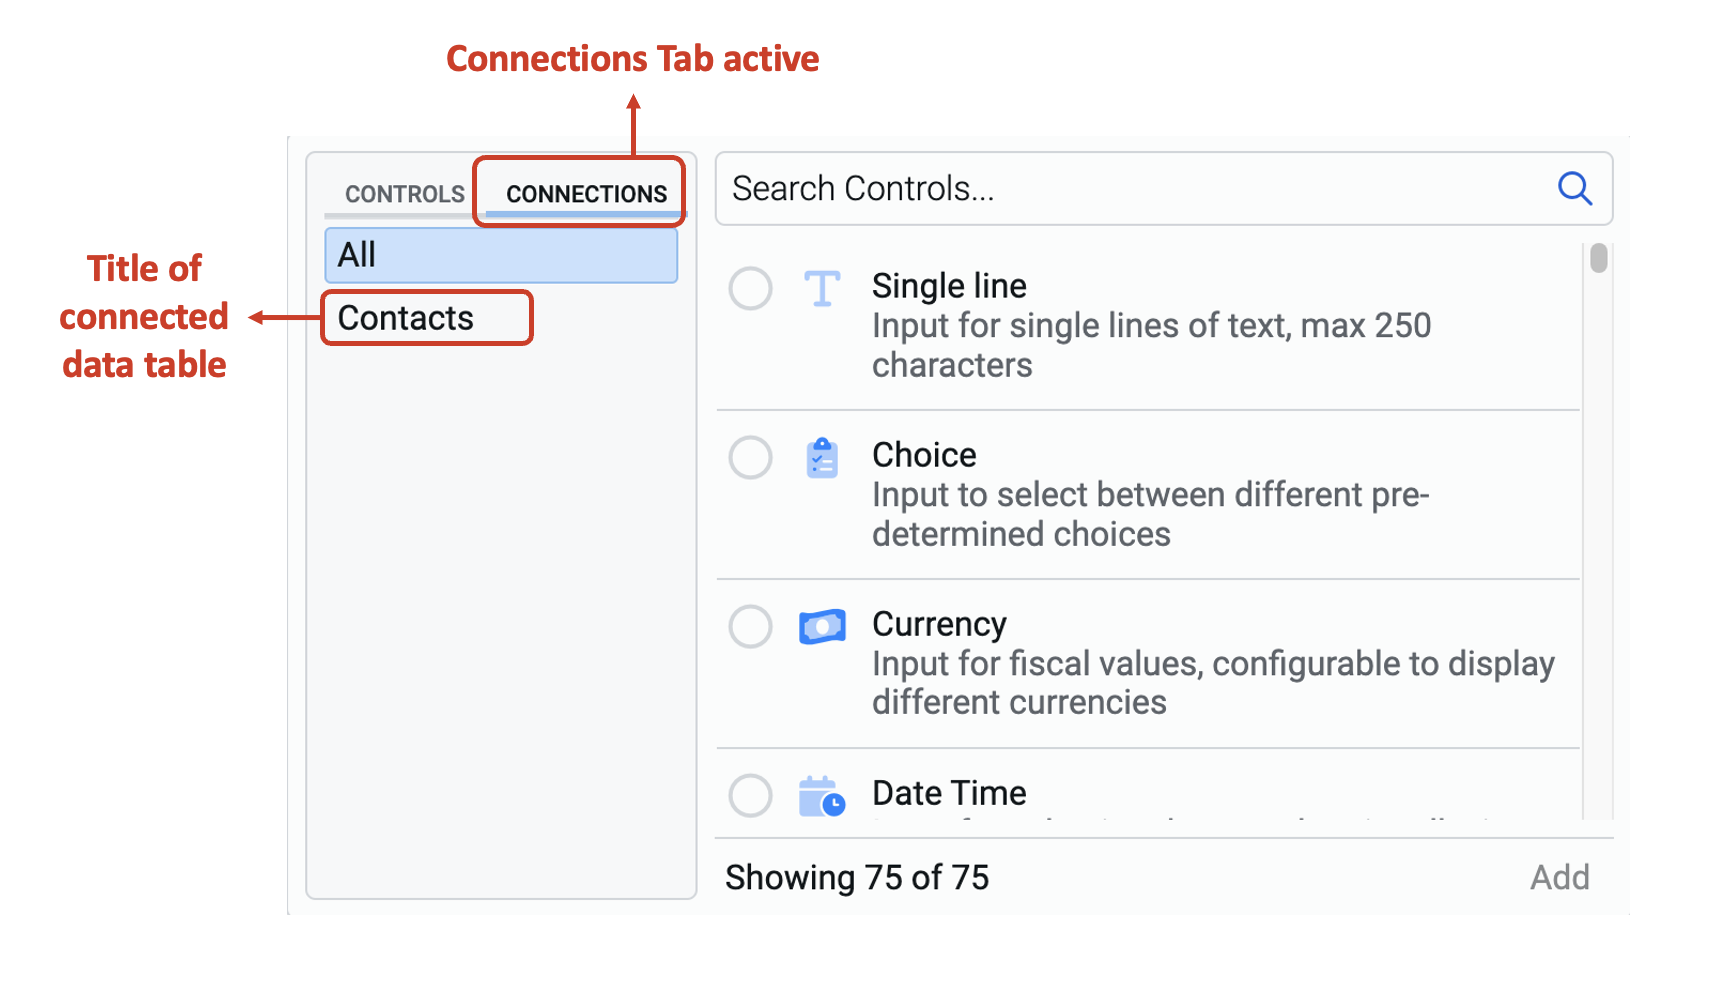 Image showing connections tab